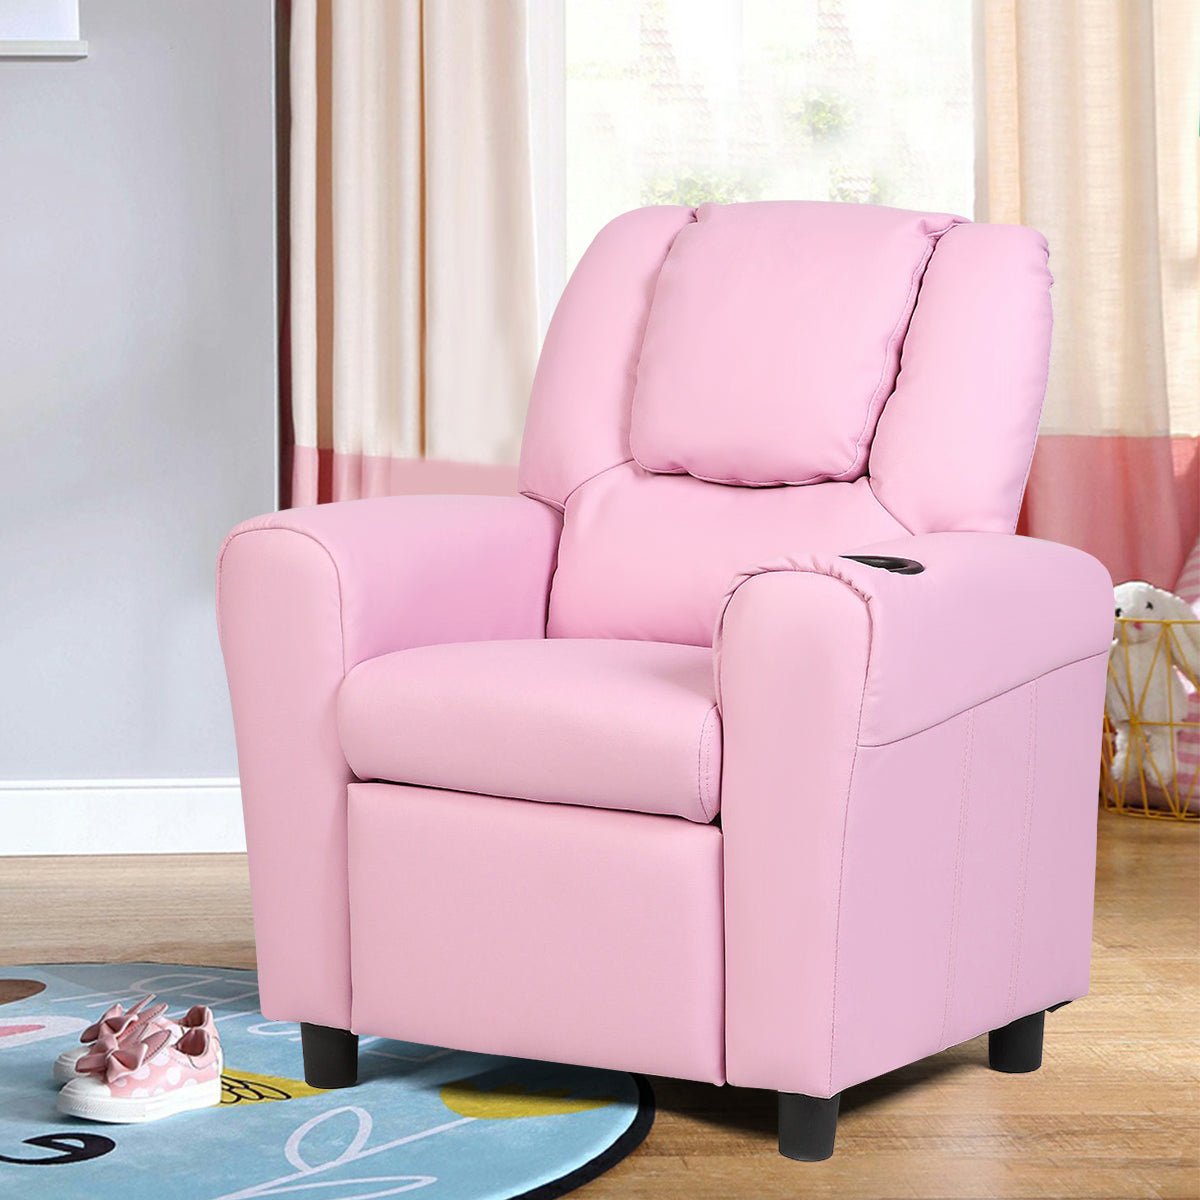 Embrace Relaxation: Pink Children's Recliner Chair with Ergonomic Armrest